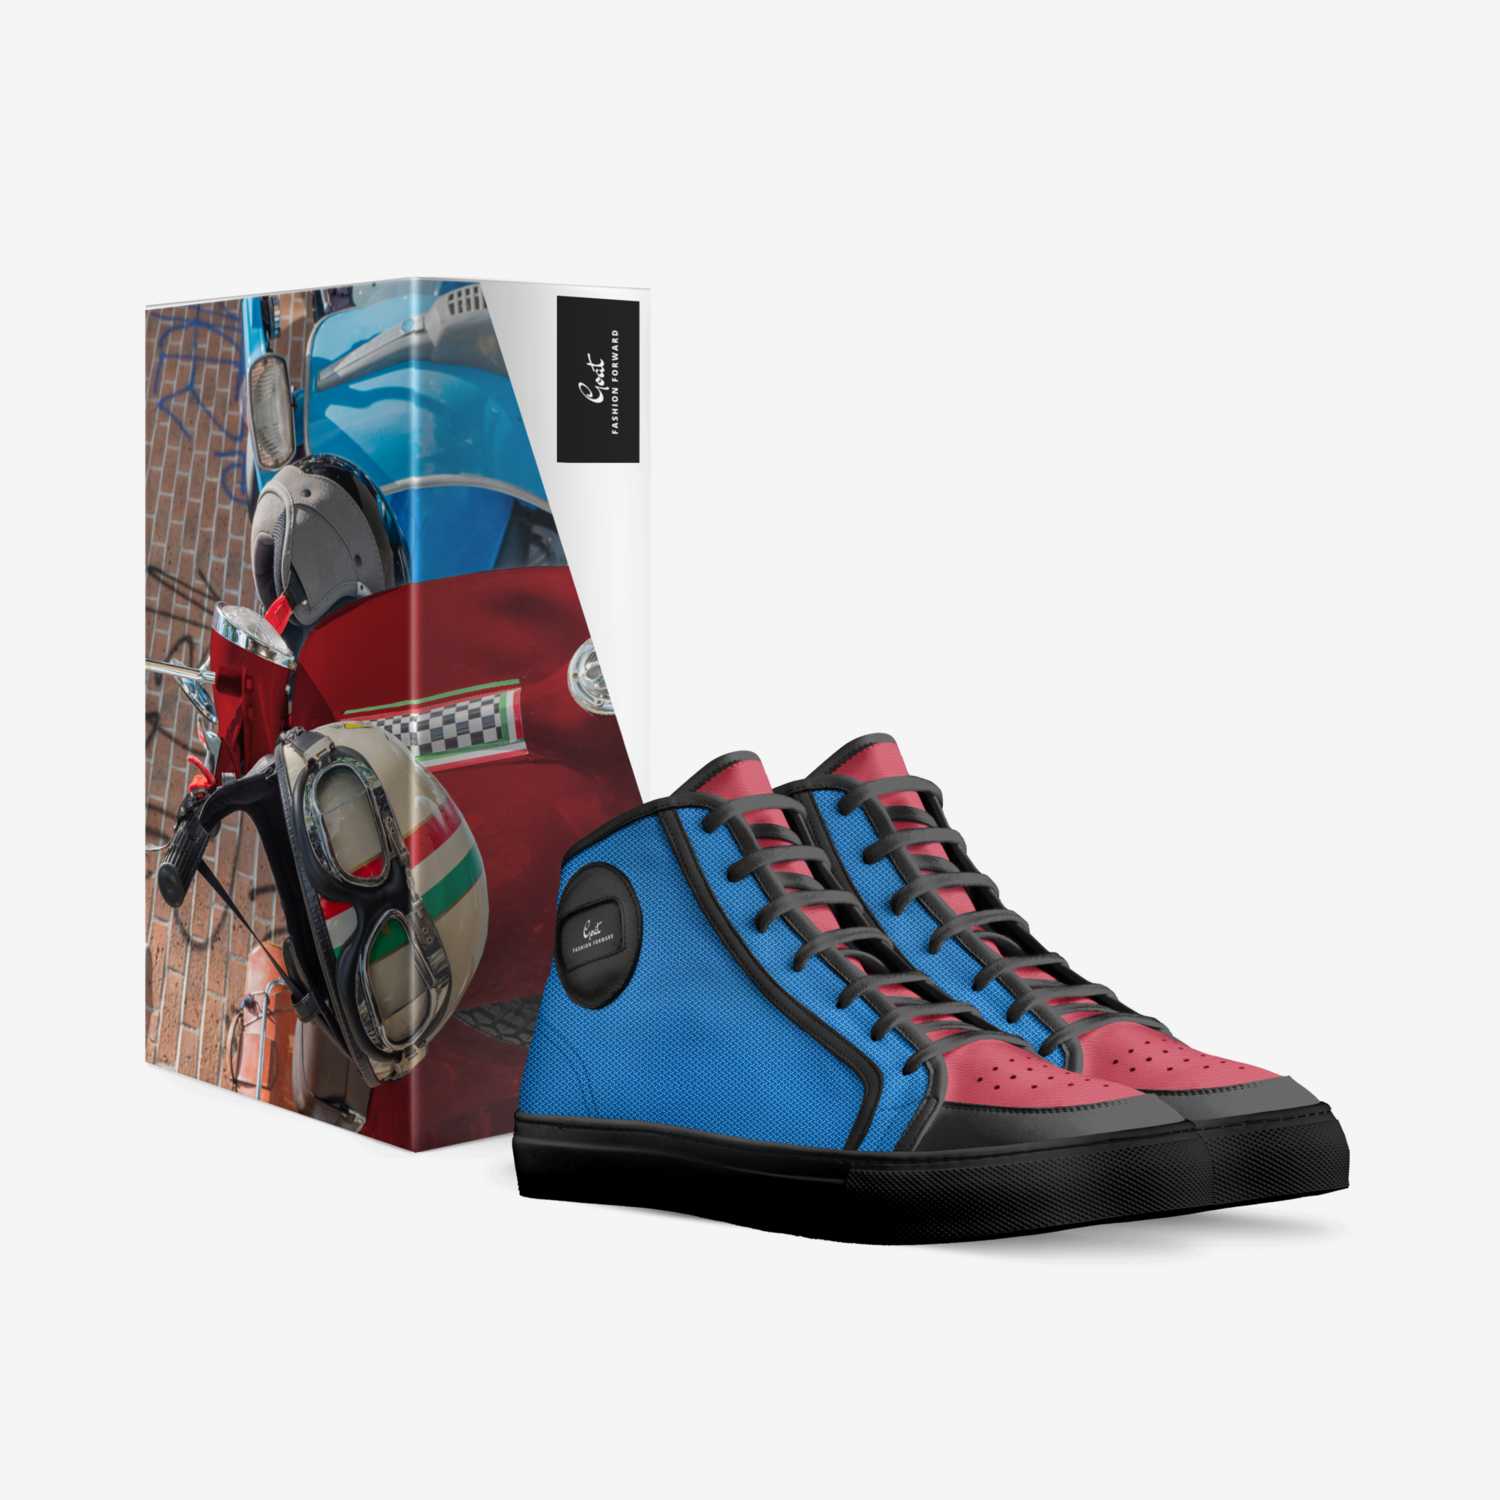 G.O.A.T IV custom made in Italy shoes by 50 Sosa | Box view